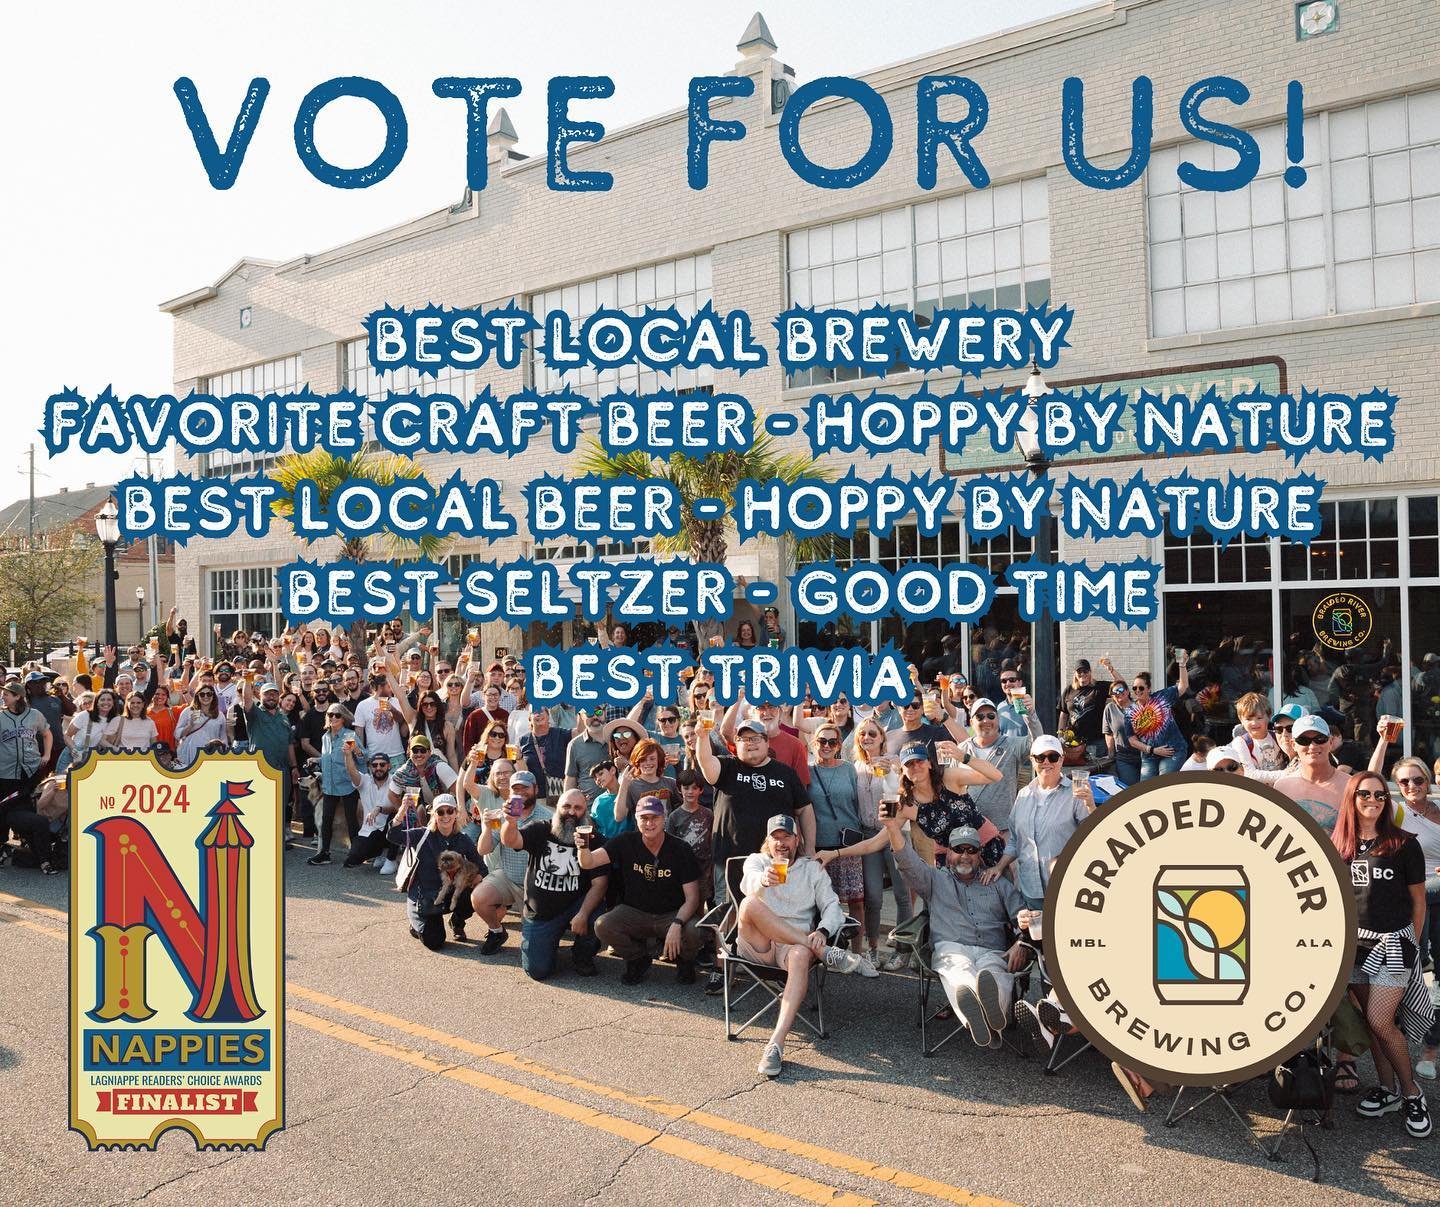 THANK YOU for nominating us for 5 different Nappies this year! Voting is now open! VoteNappies.com or link in bio (Instagram only)

🍺 Best Local Brewery
🍺 Favorite Local Craft Beer - Hoppy by Nature
🍺 Best Local Beer - Hoppy by Nature
💧 Best Selt